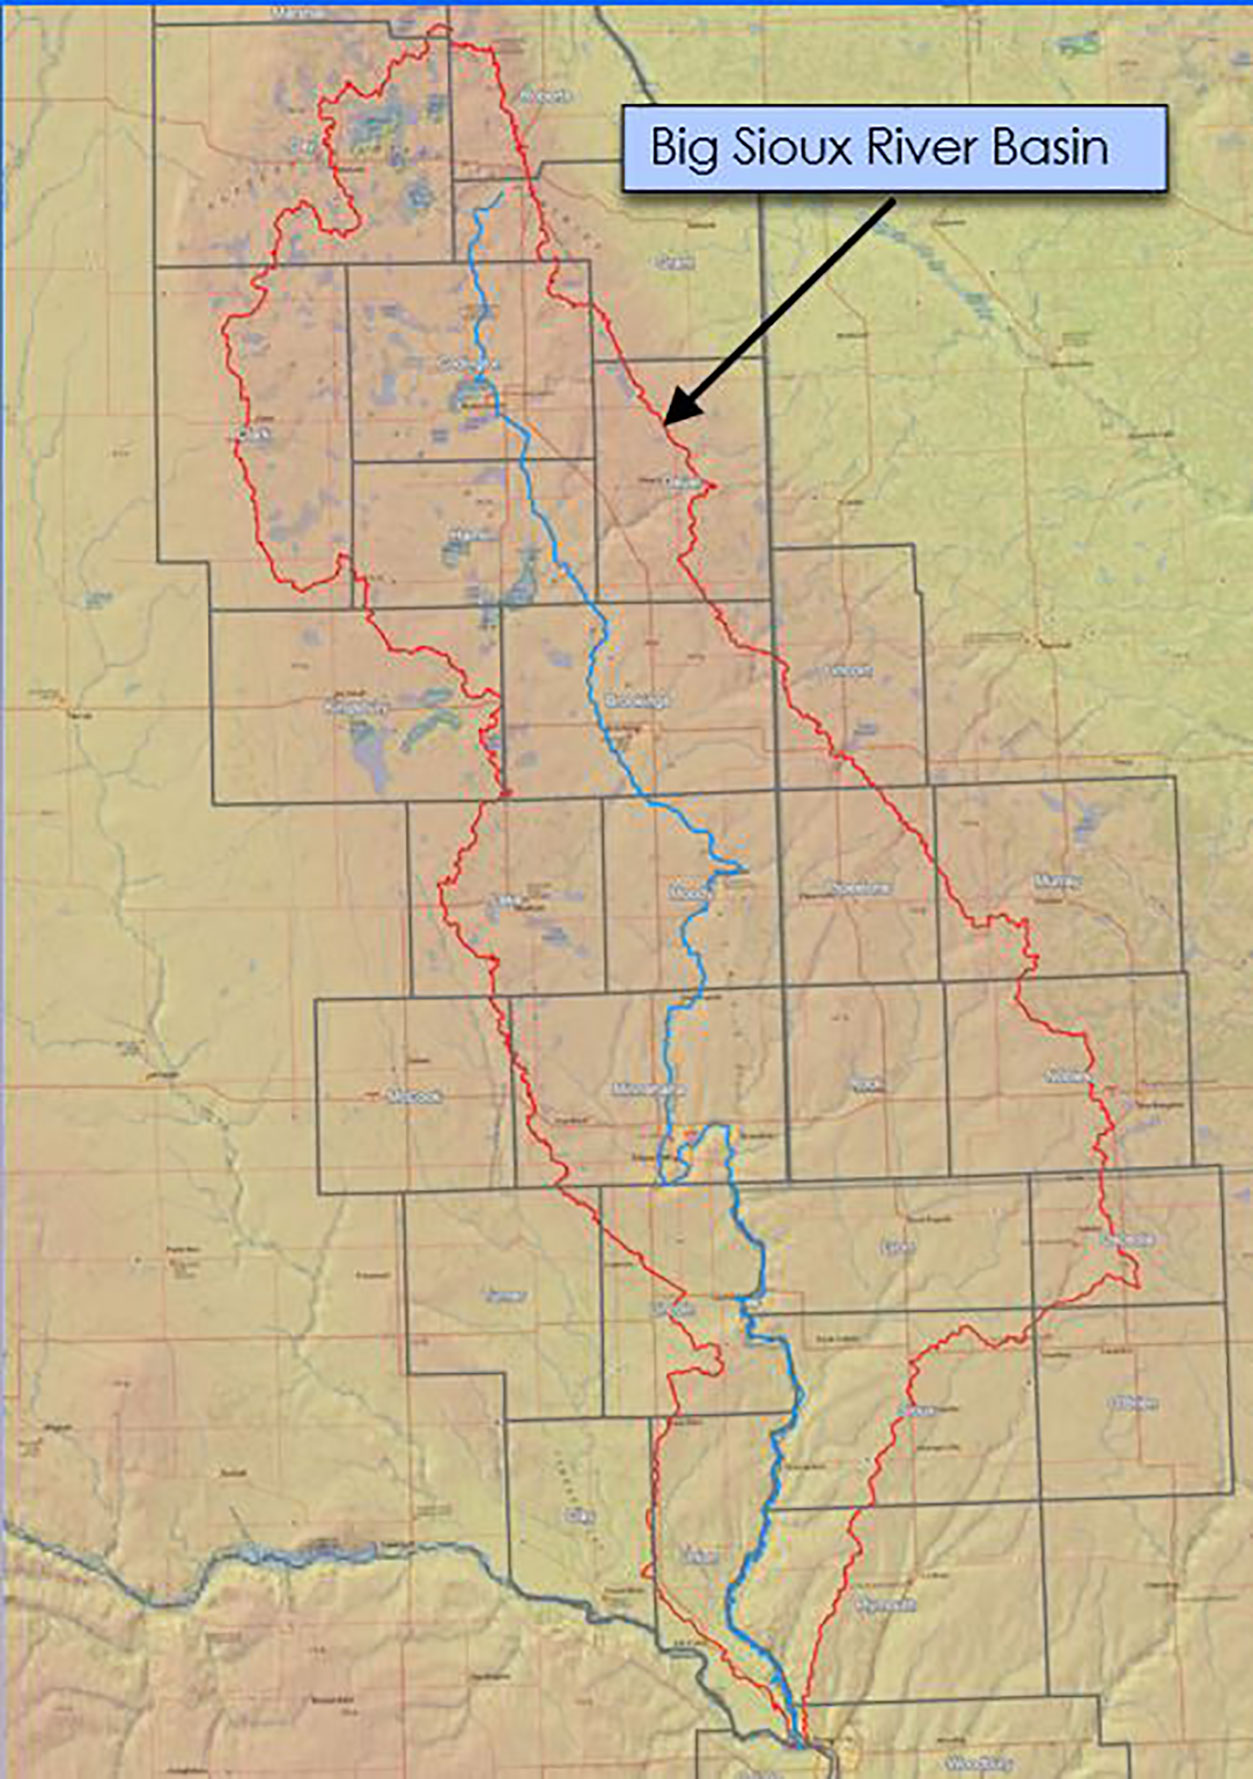 A map of the Big Sioux River Basin.